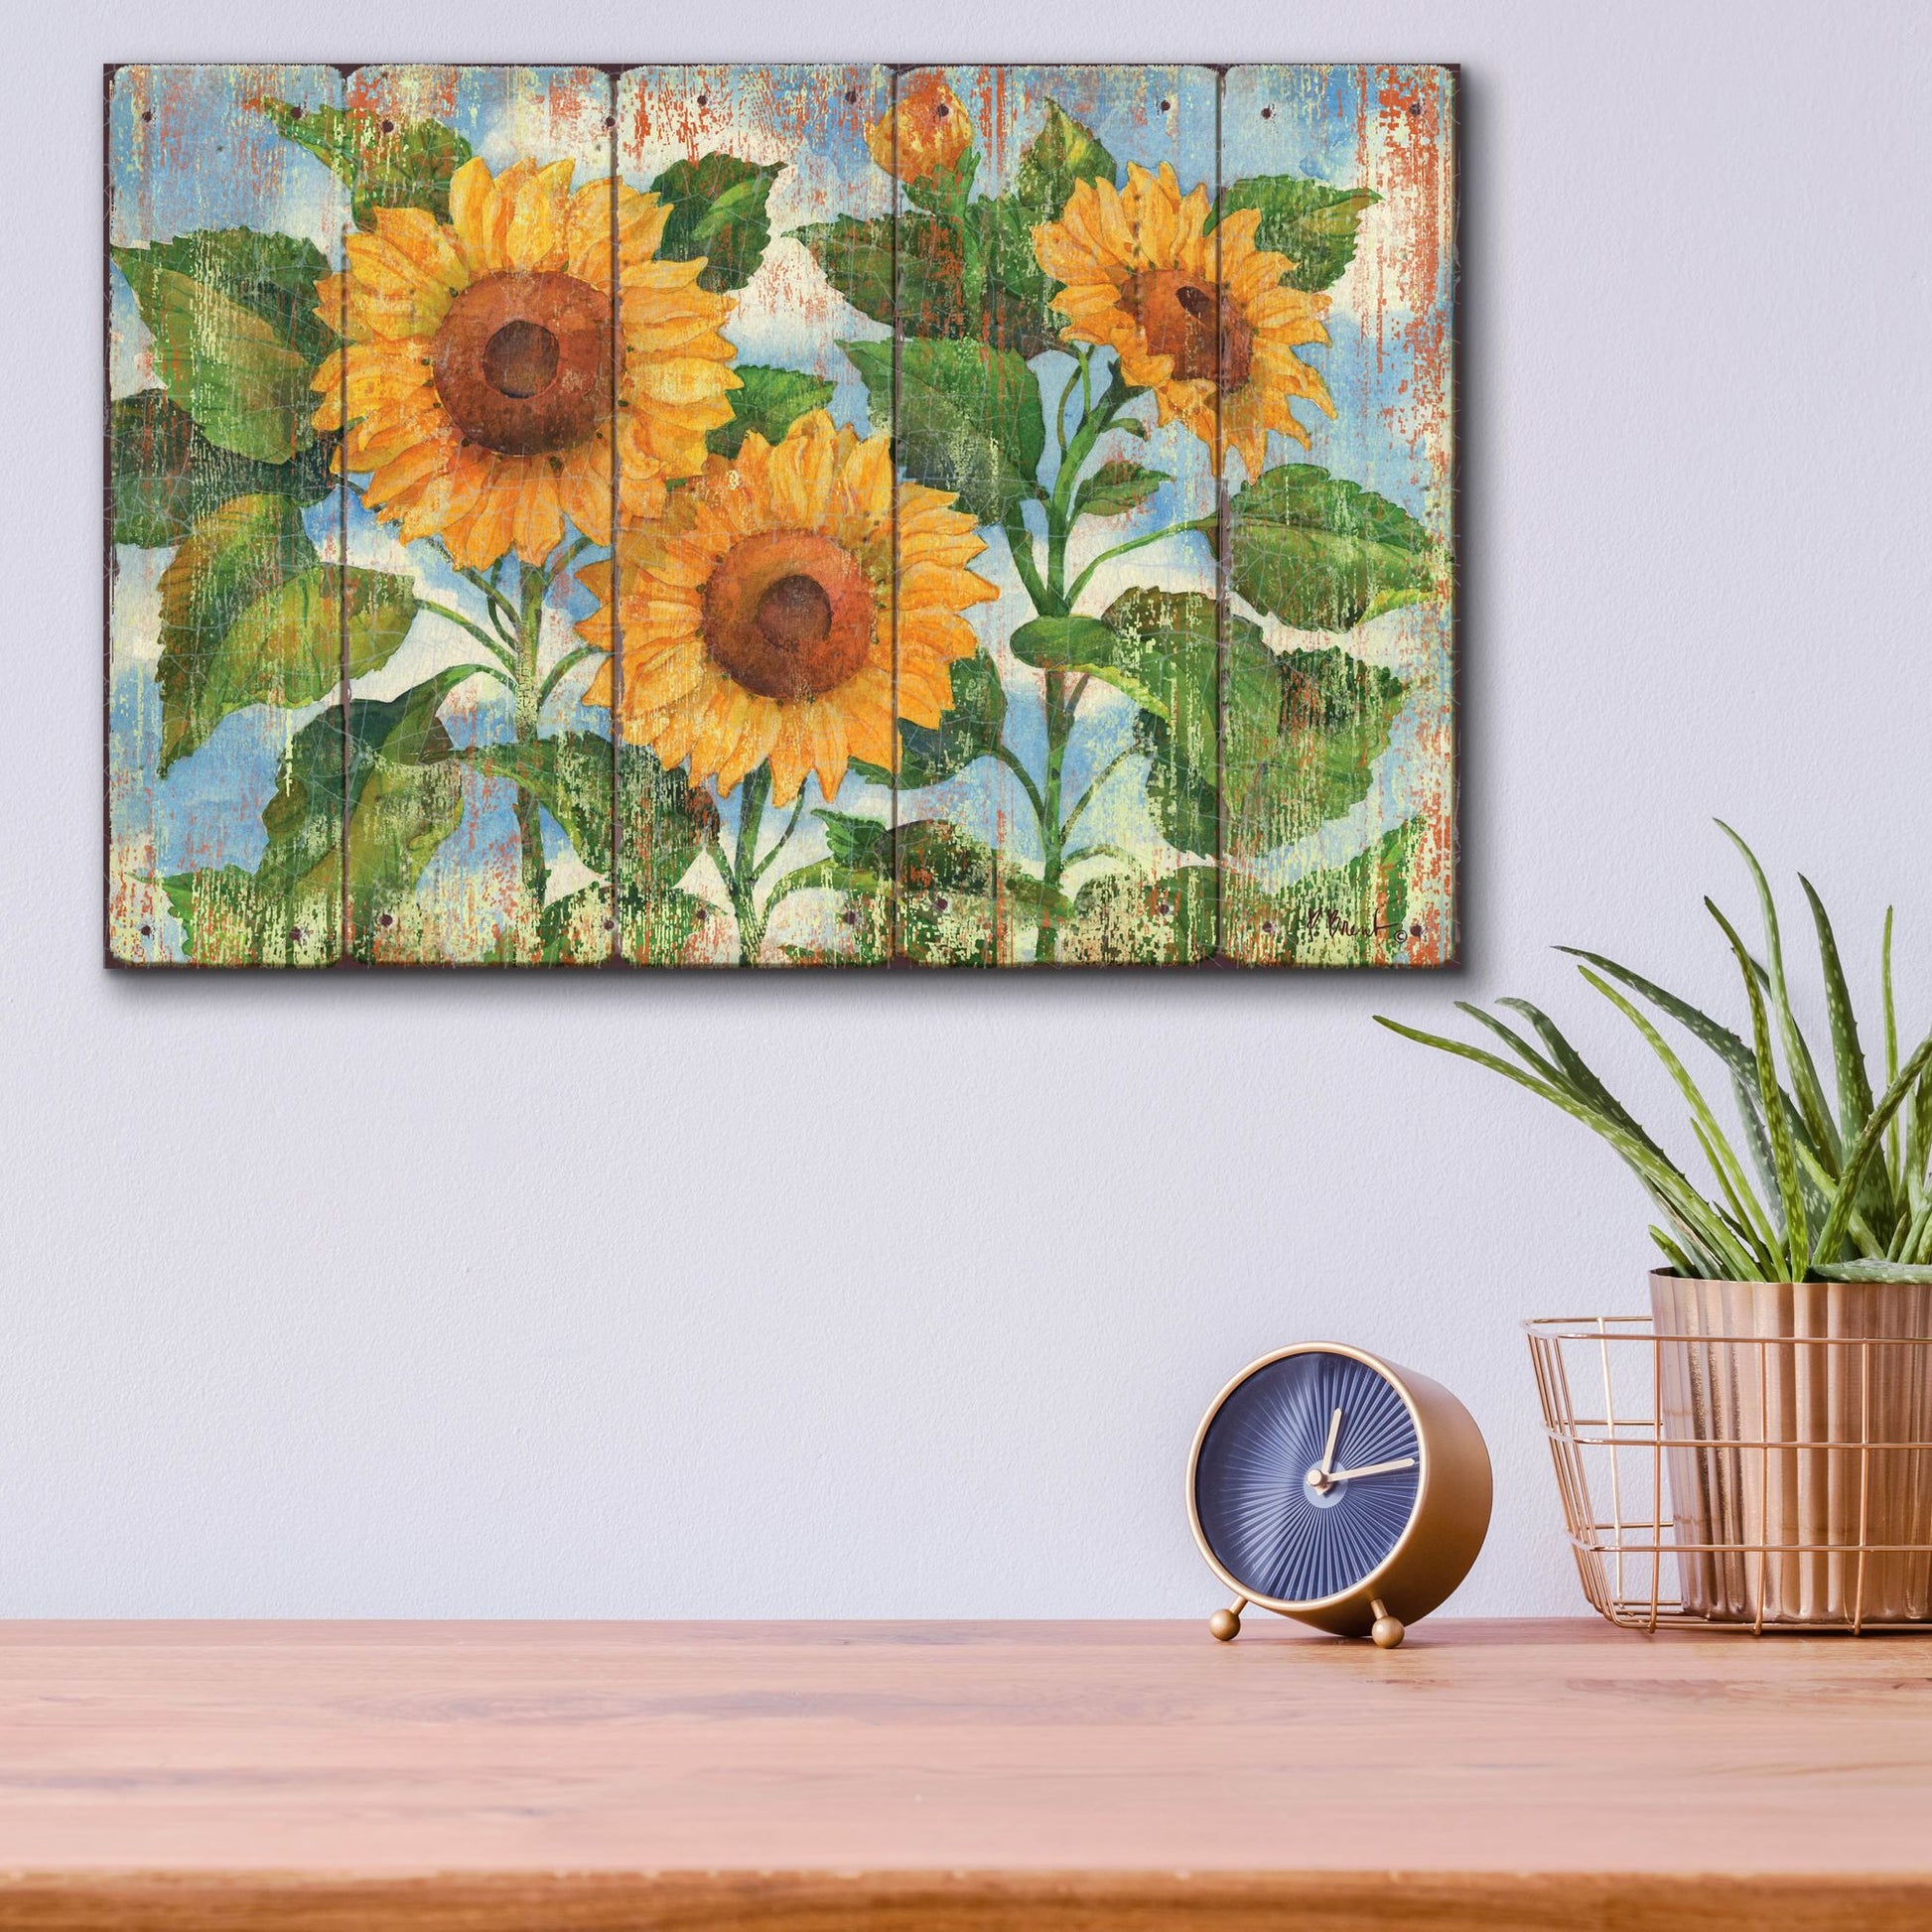 Epic Art 'Summer Sunflowers - Distressed' by Paul Brent, Acrylic Glass Wall Art,16x12